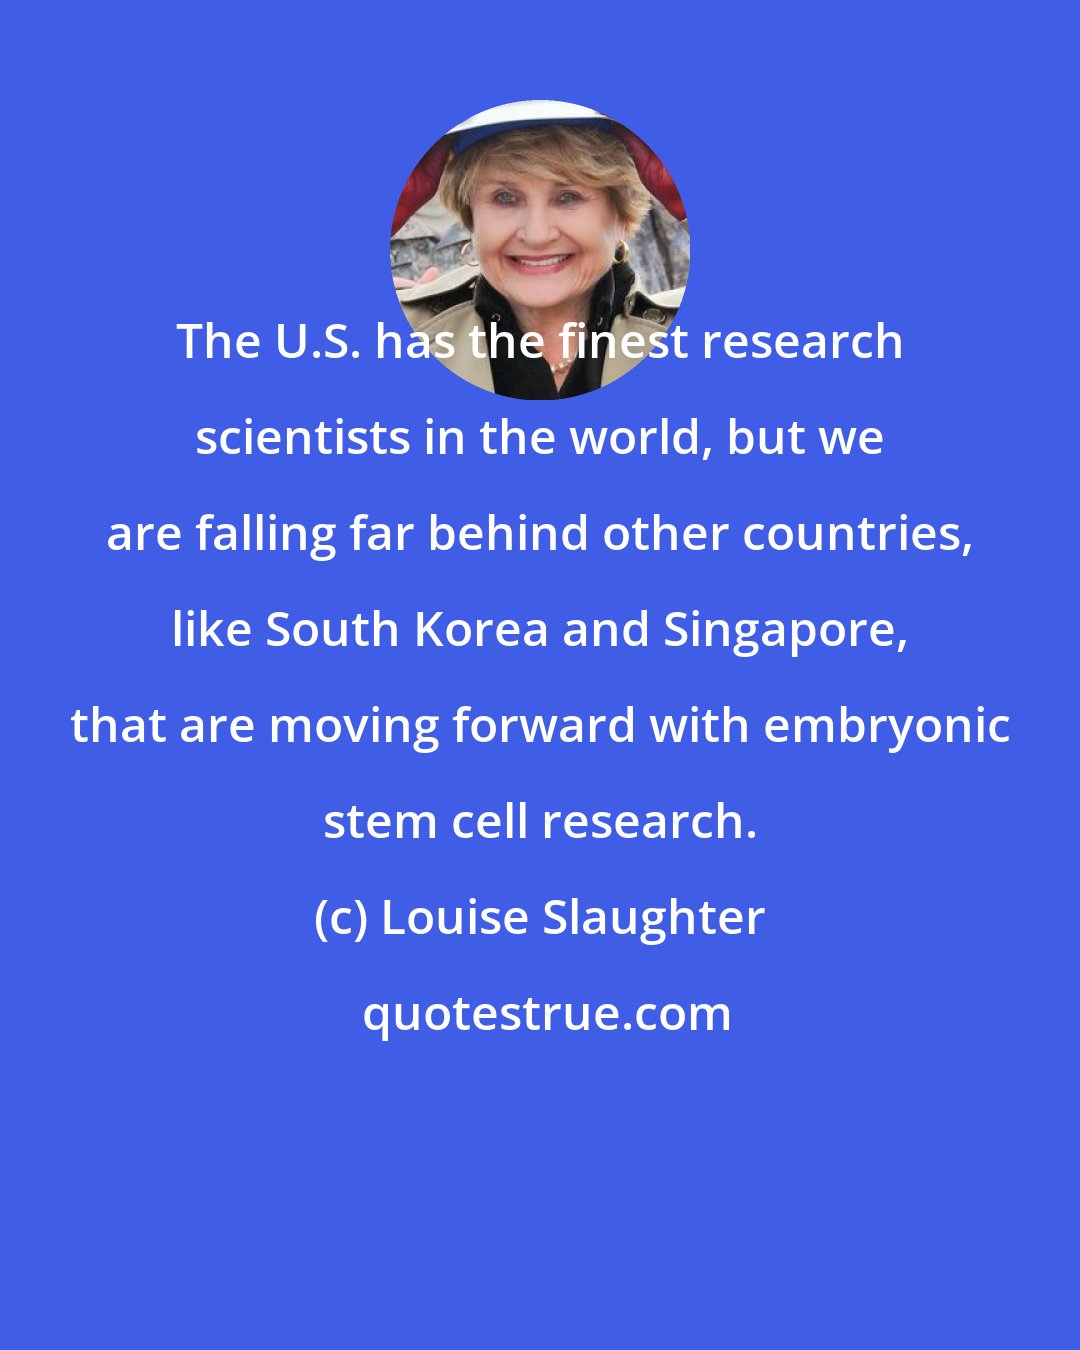 Louise Slaughter: The U.S. has the finest research scientists in the world, but we are falling far behind other countries, like South Korea and Singapore, that are moving forward with embryonic stem cell research.